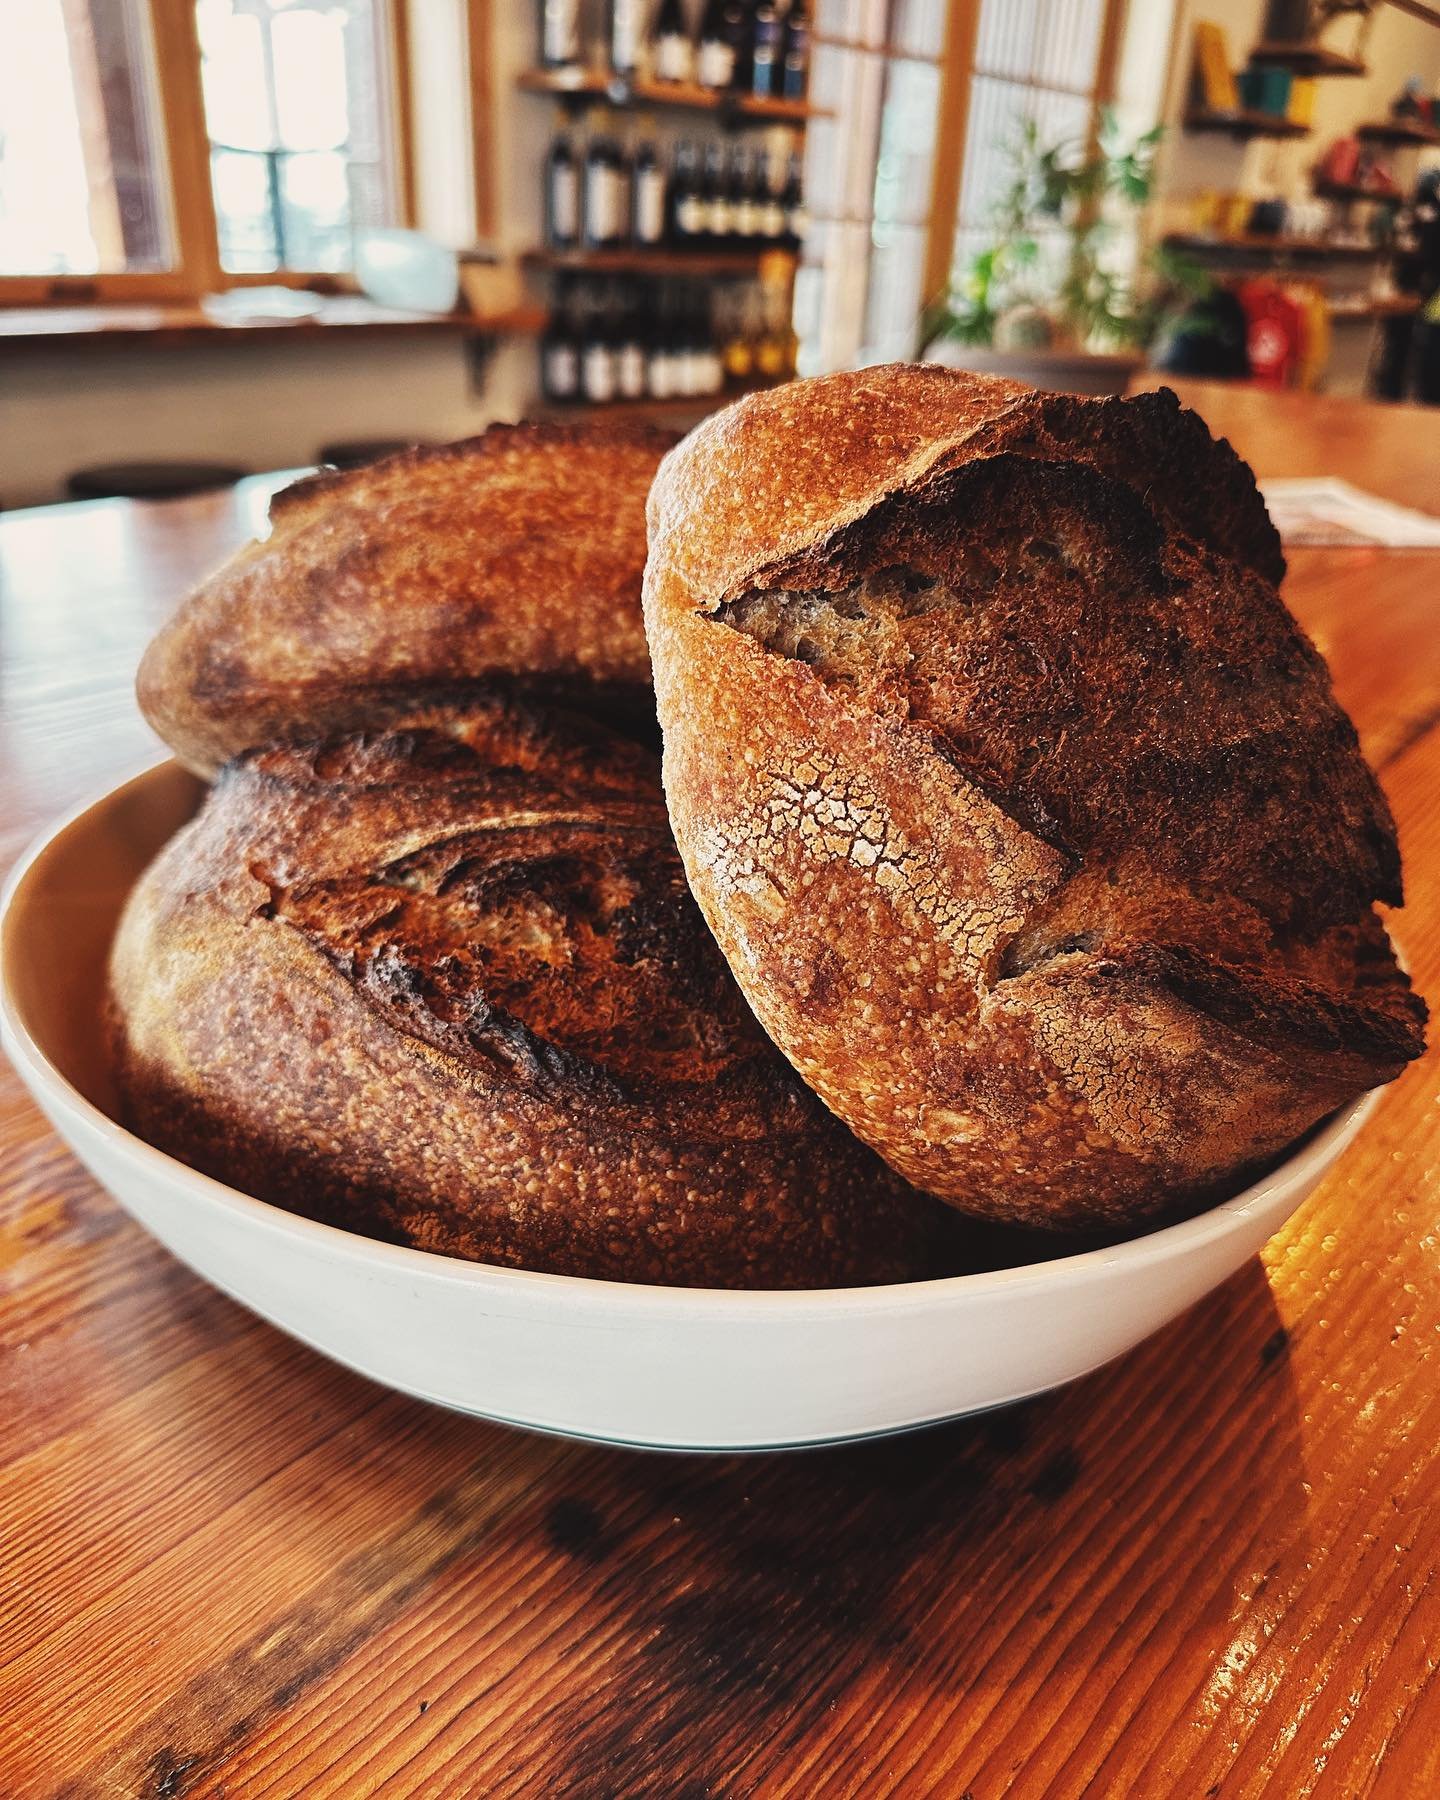 @moxiebread is in the house! Come grab a beautiful sourdough loaf on this snowy spring day, available for $10, and a special avocado toast served on the same bread. Come pick up a whole loaf or try it out in house. Here till we sell out!